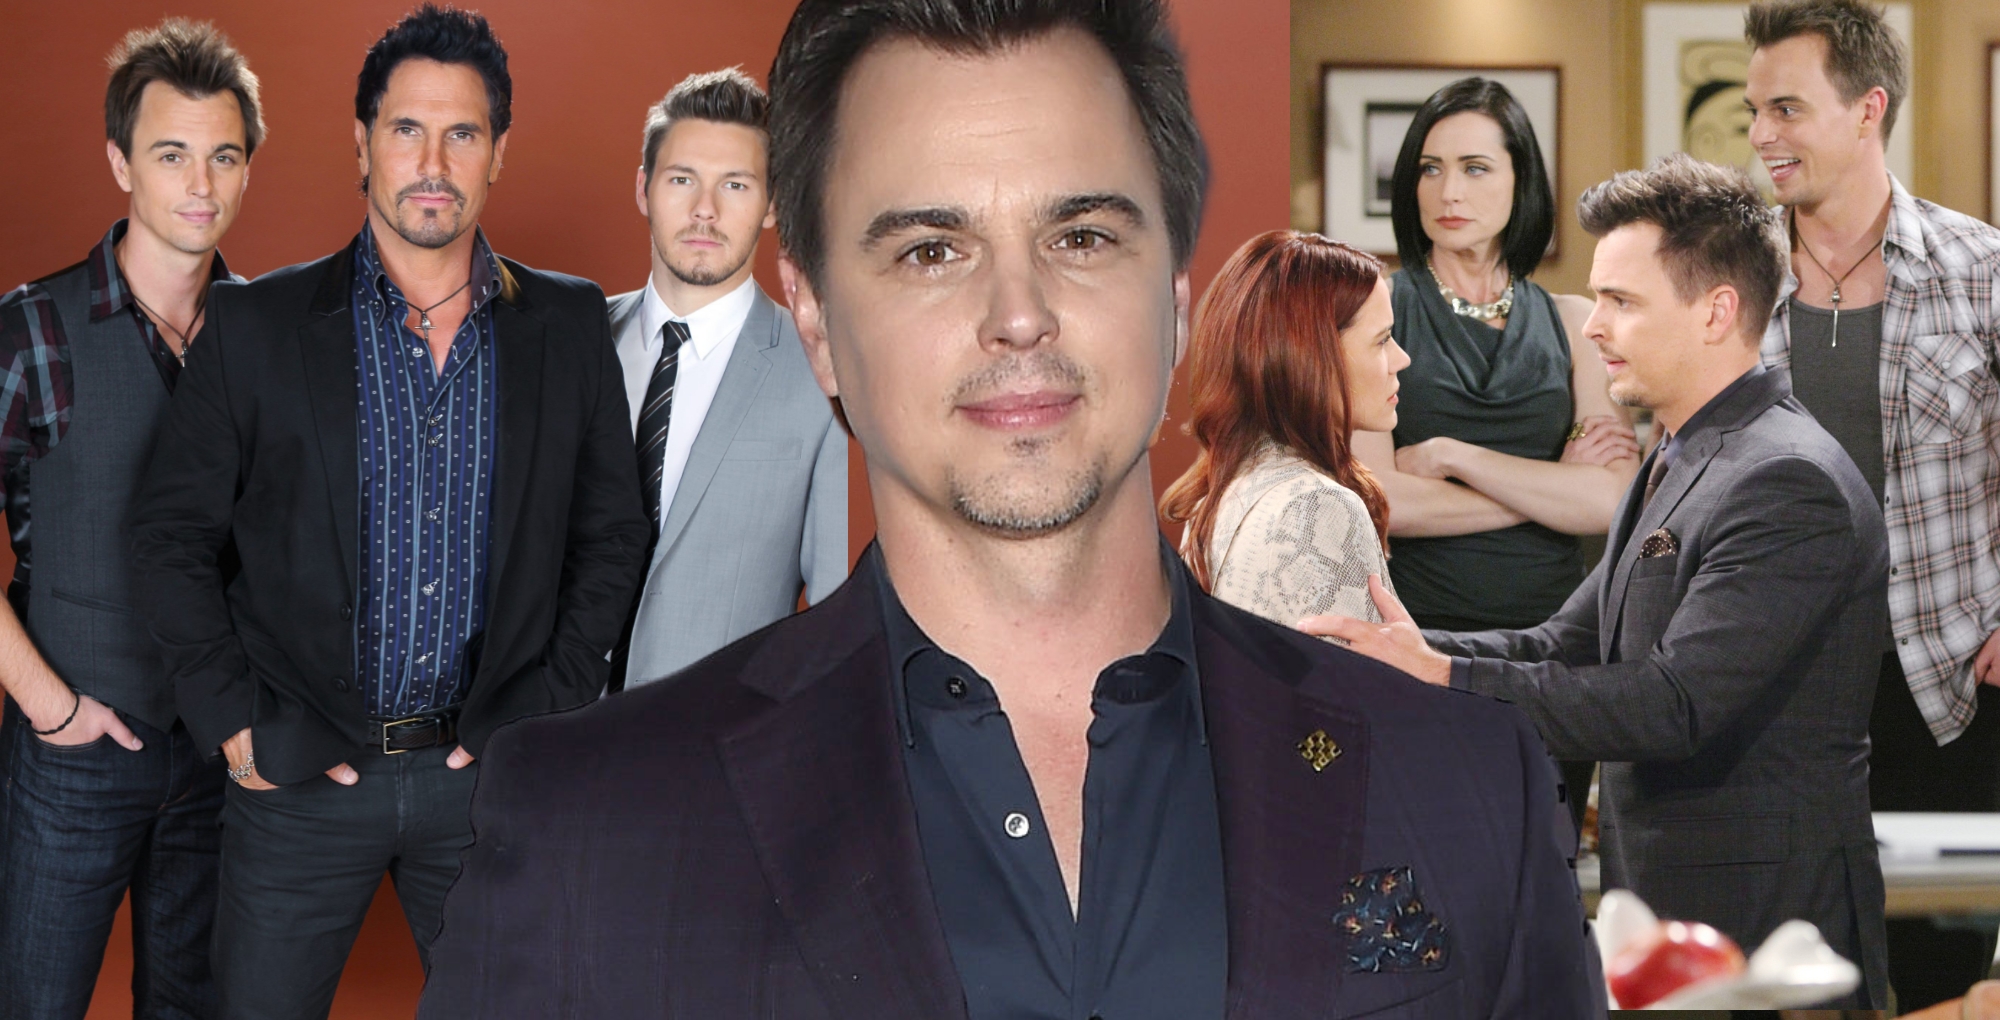 bold and the beautiful star darin brooks marks 10 years on the soap.